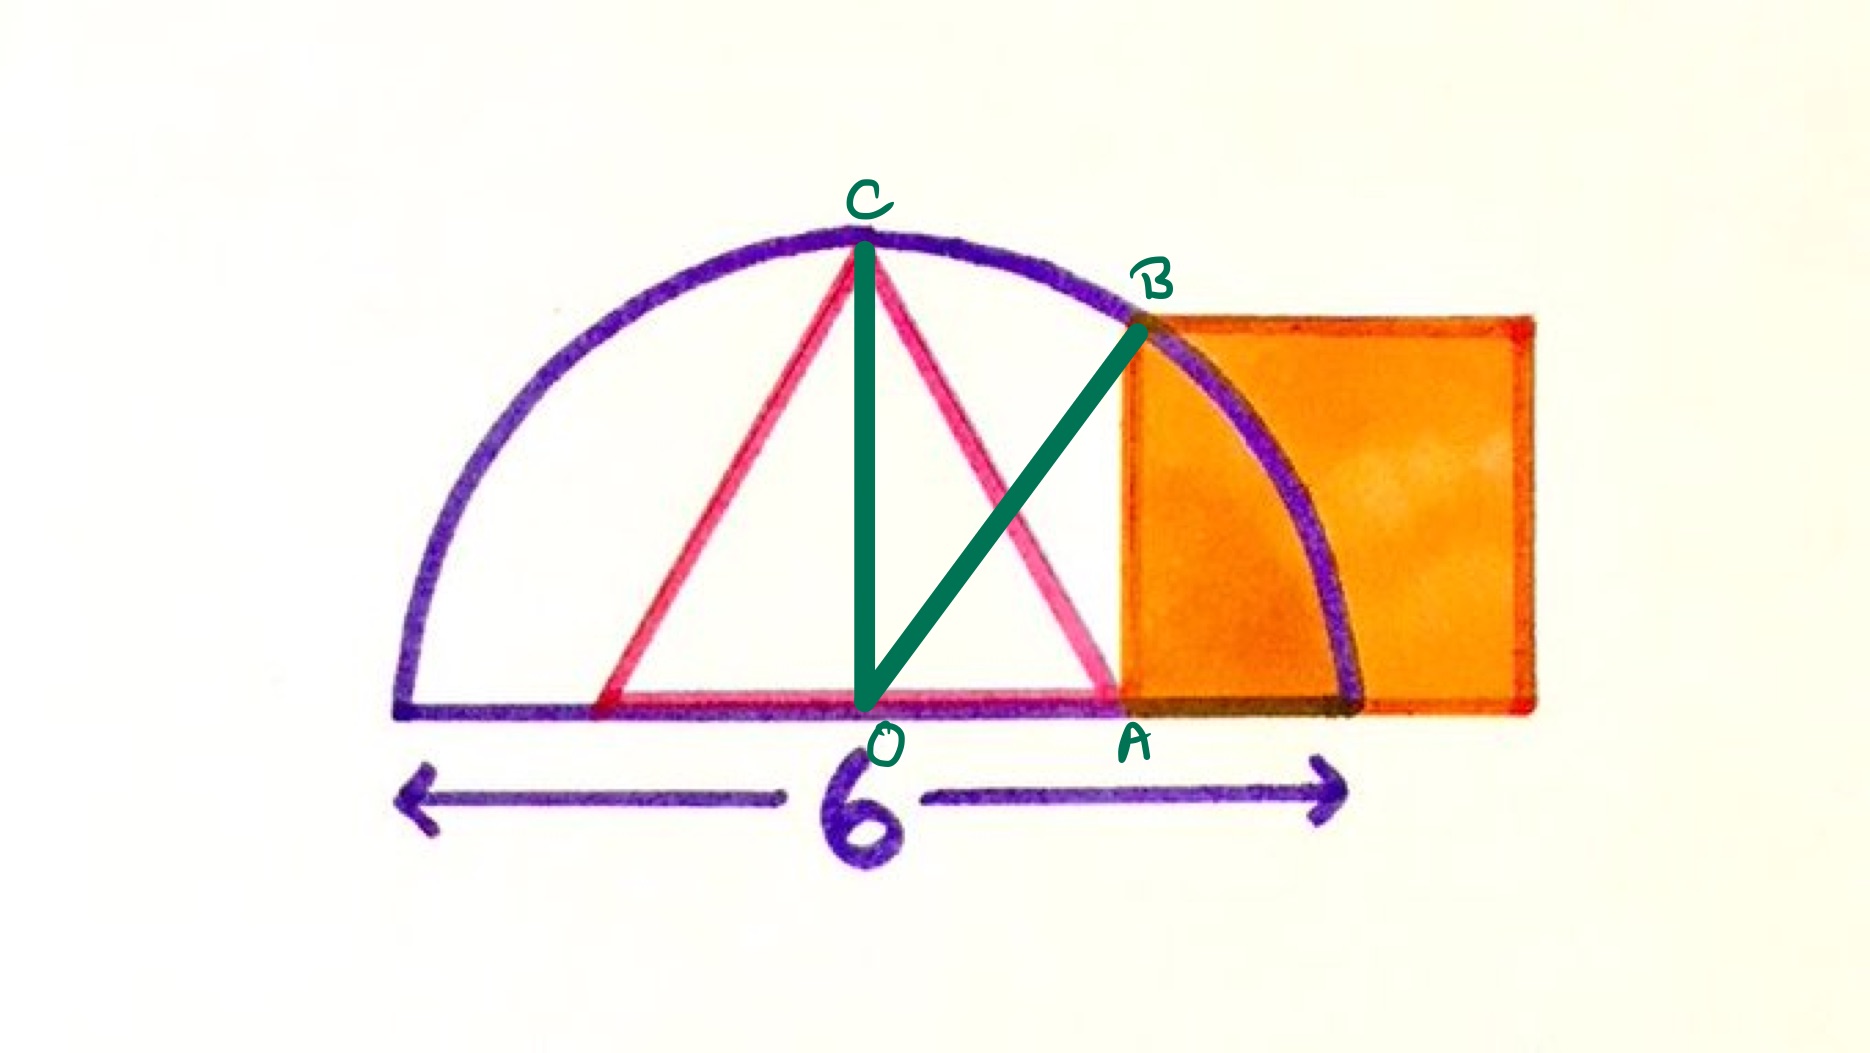 Triangle in semi-circle with square labelled